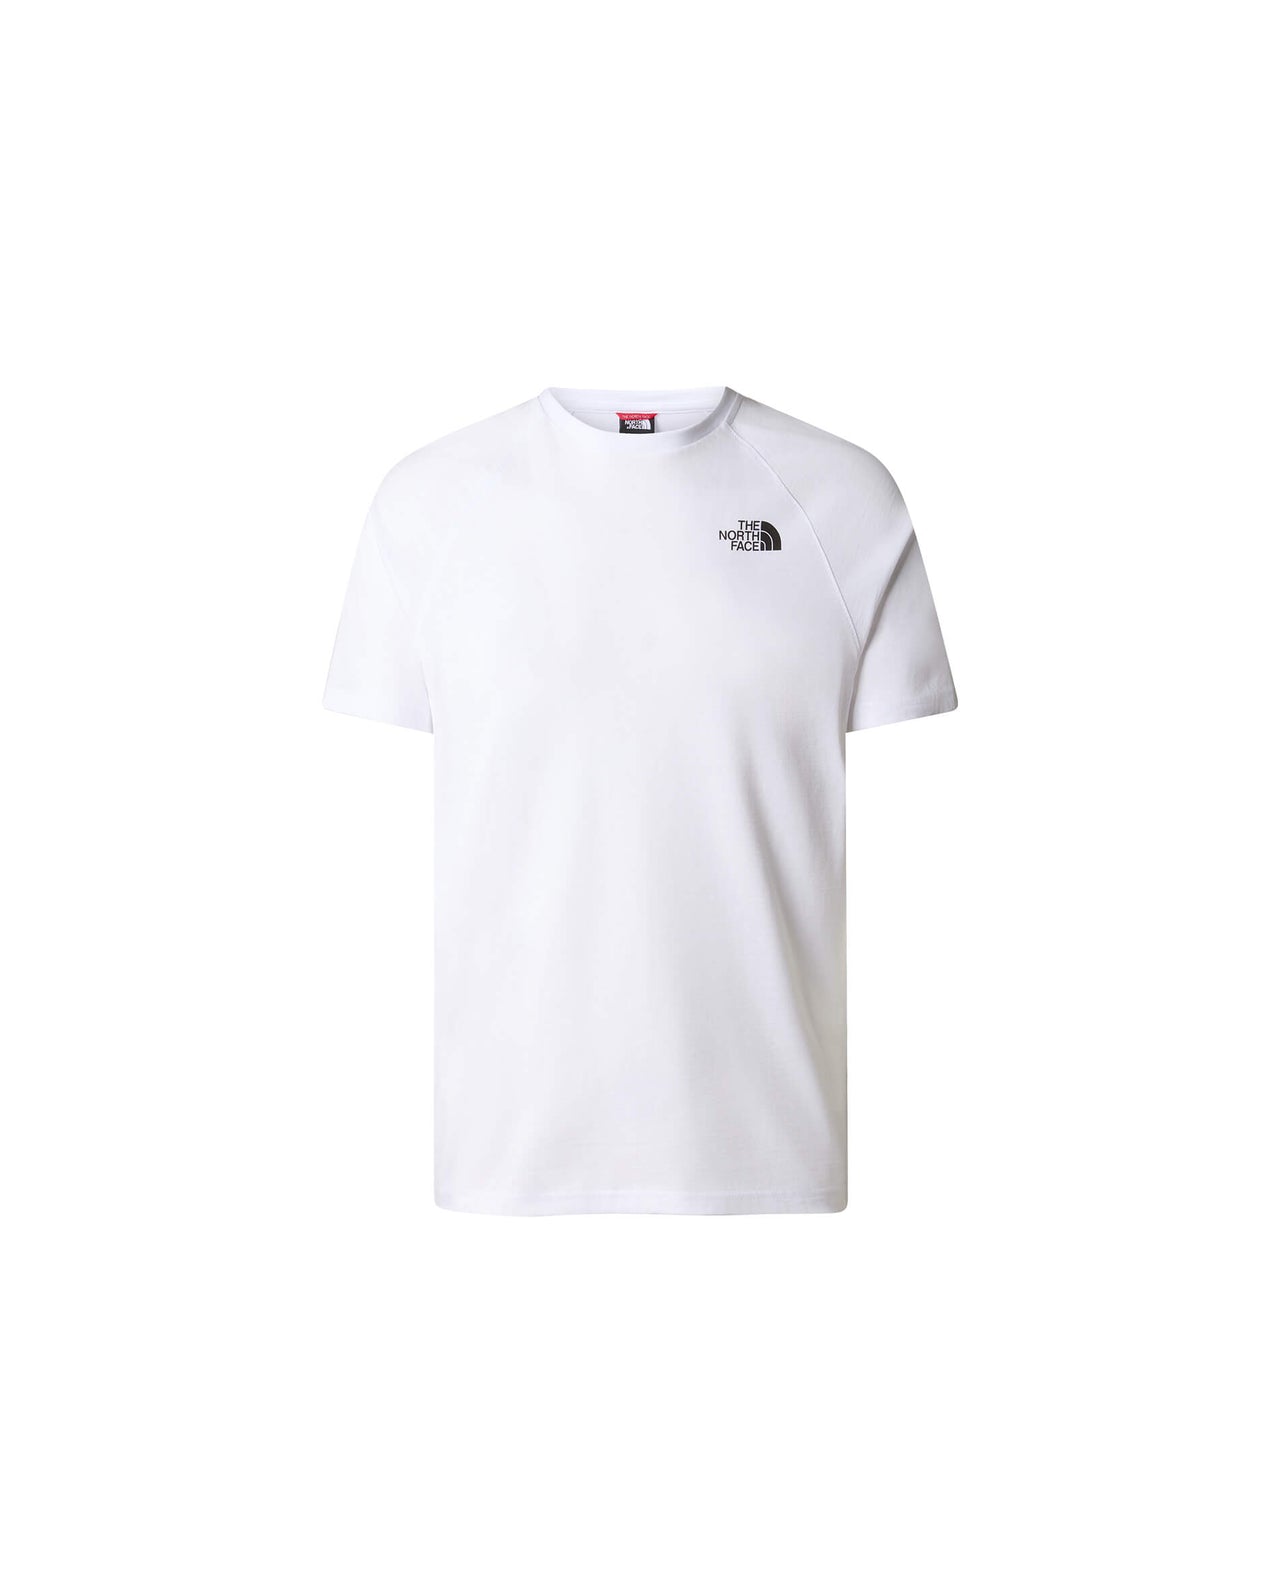 The North Face North Faces Tee